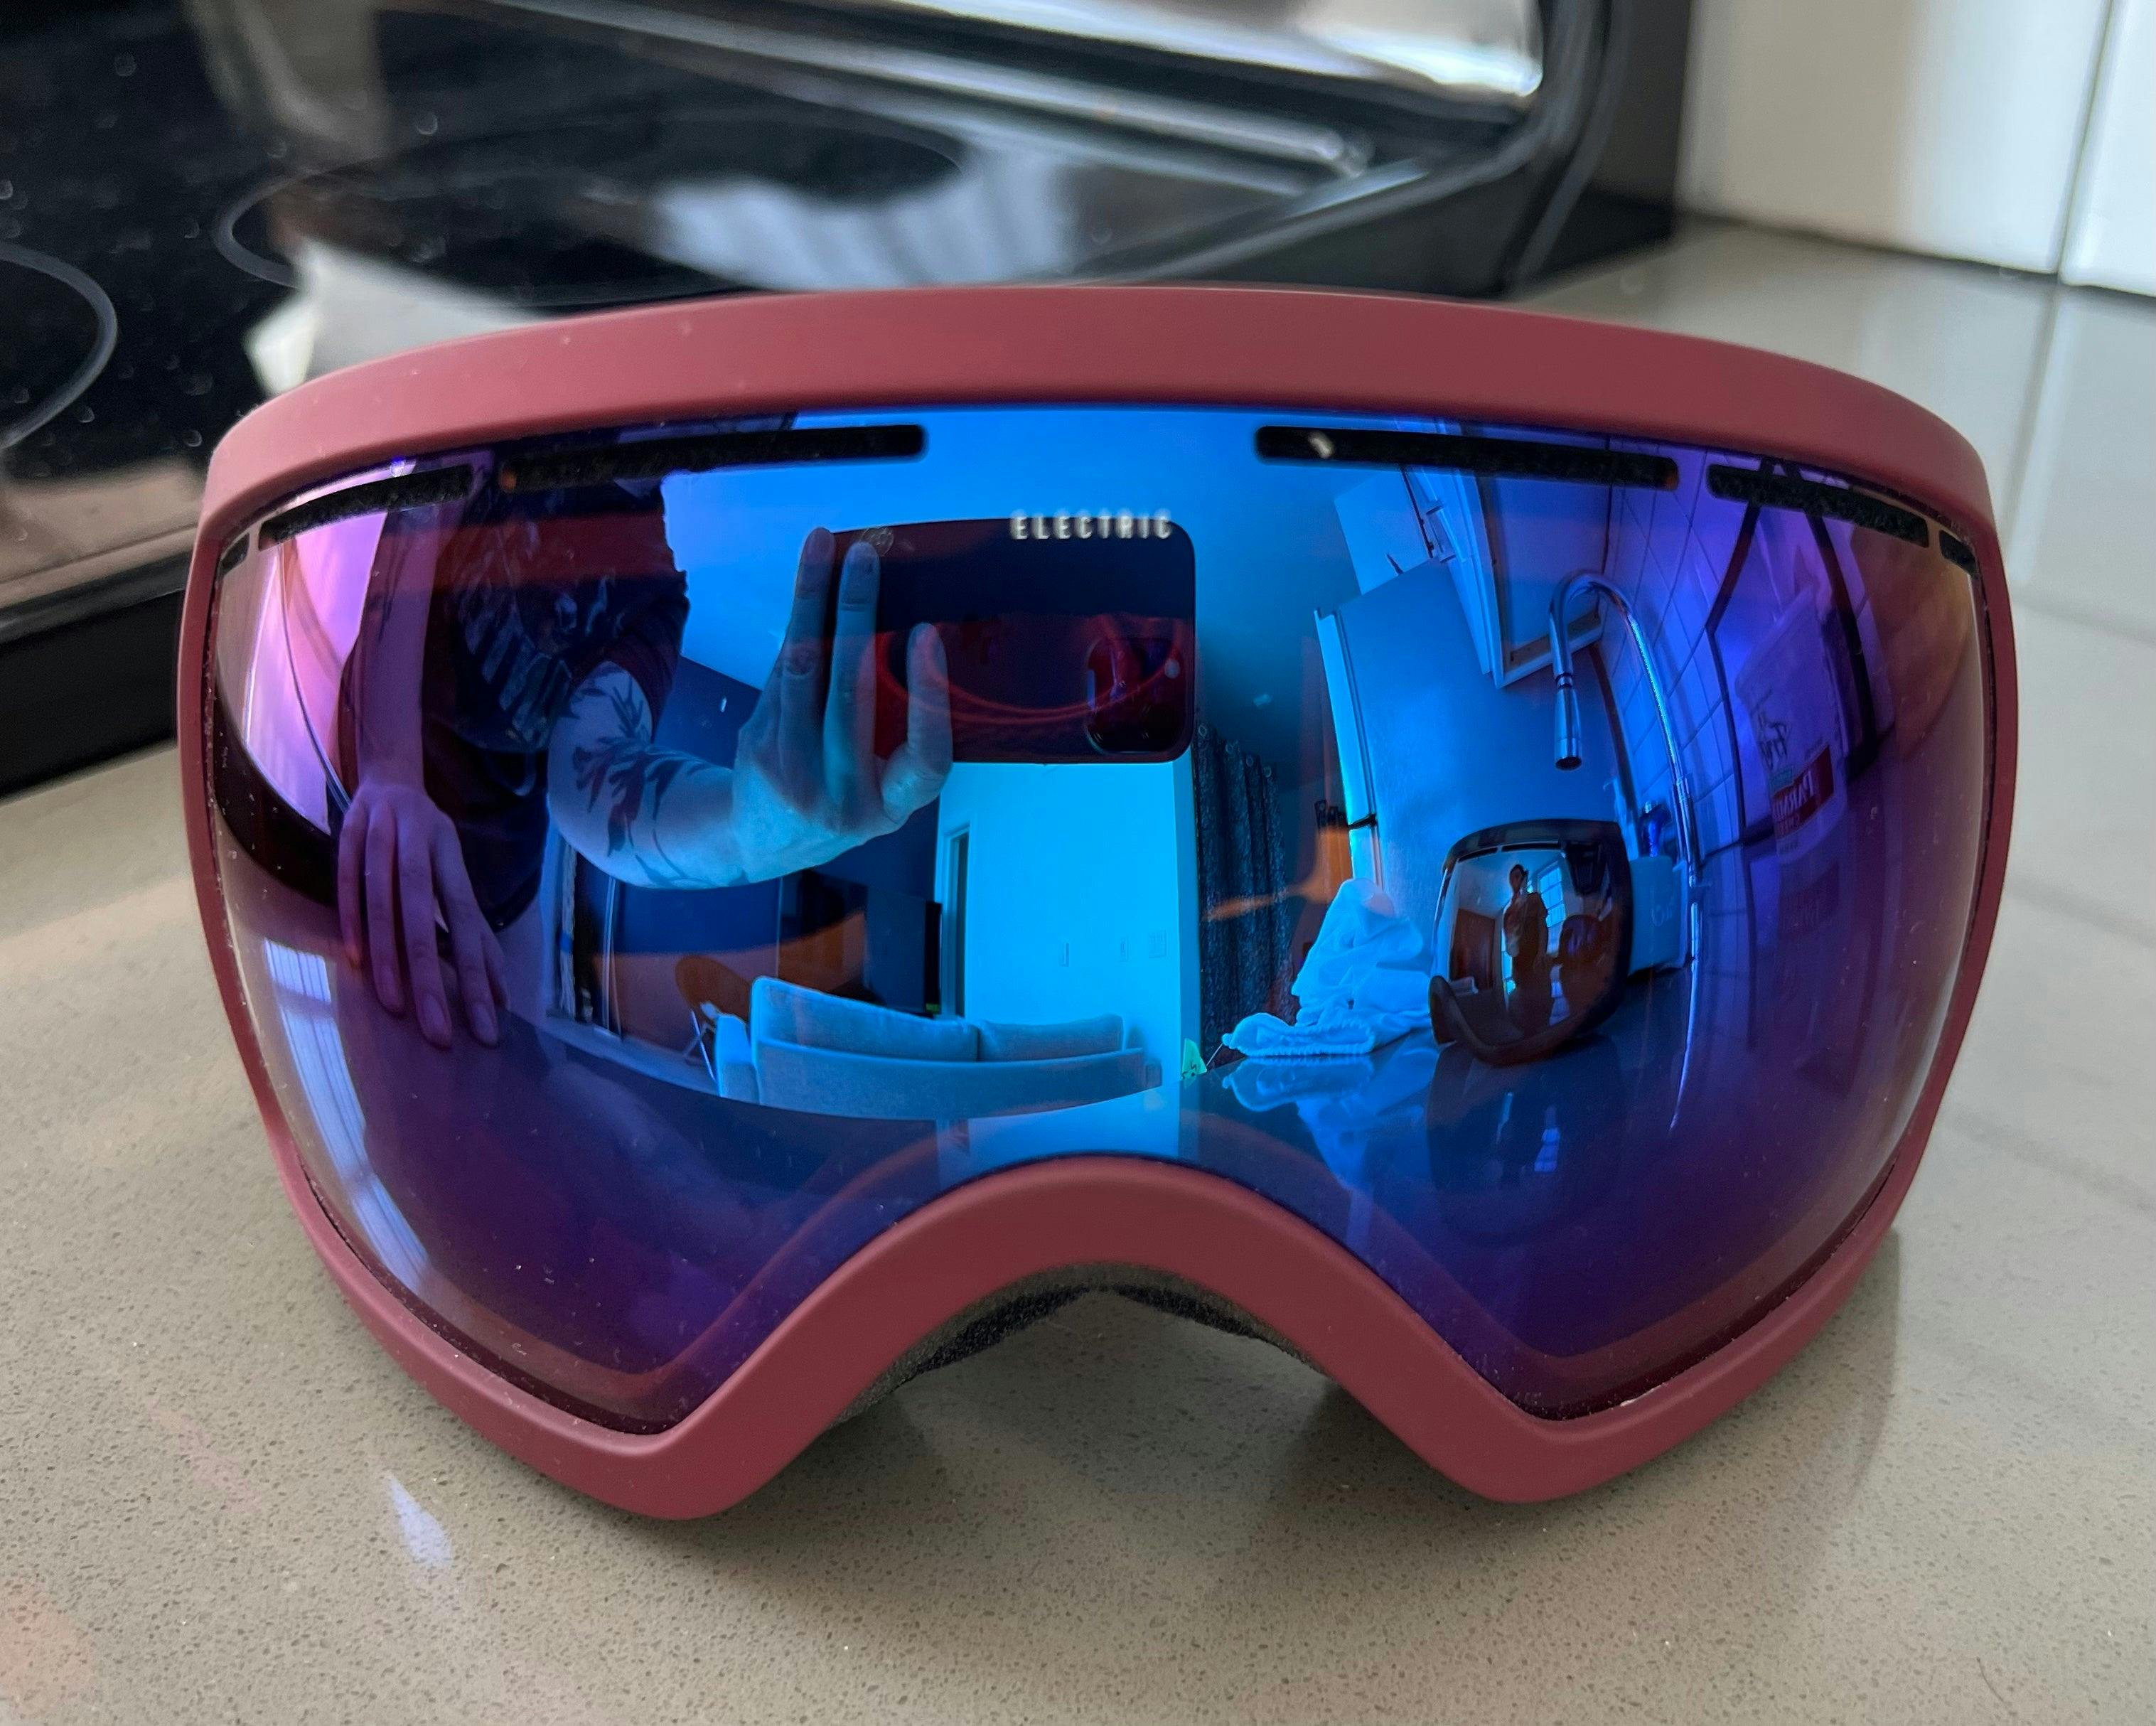 Electric Snow Goggles  - Womens S/M